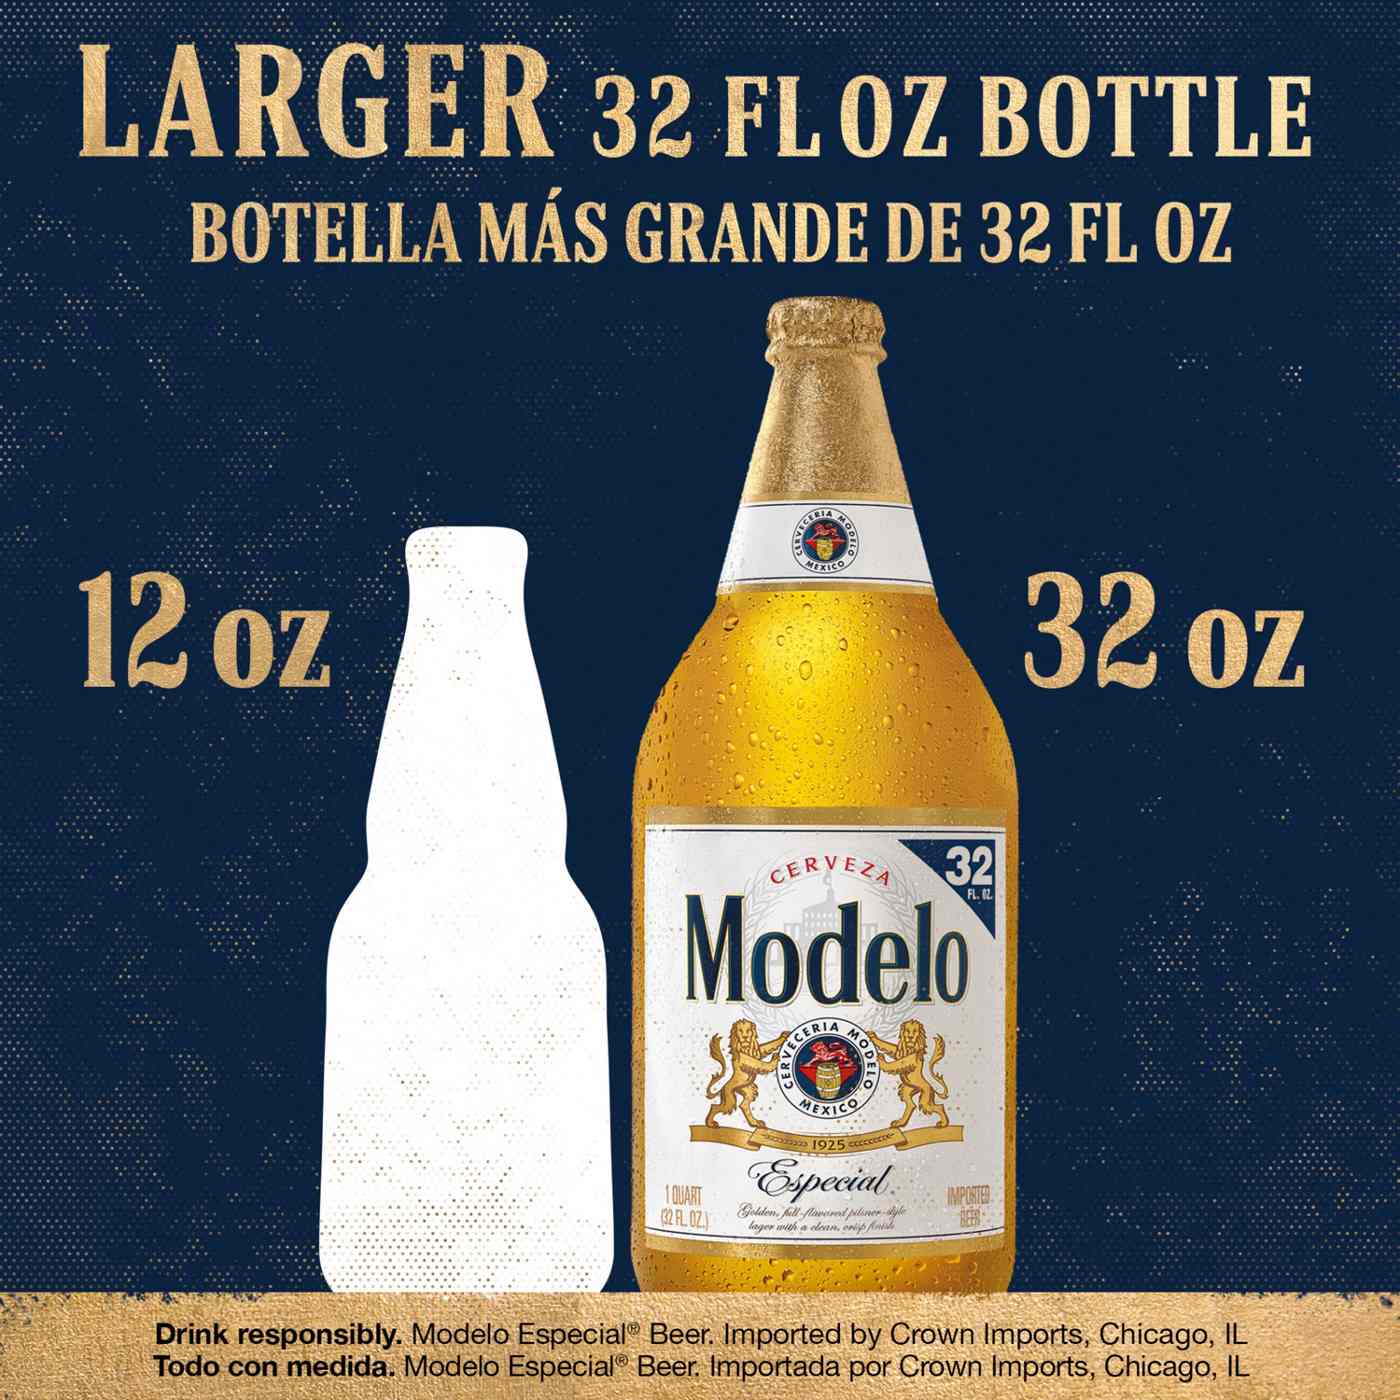 Modelo Especial Mexican Lager Import Beer 32 oz Bottle; image 4 of 10